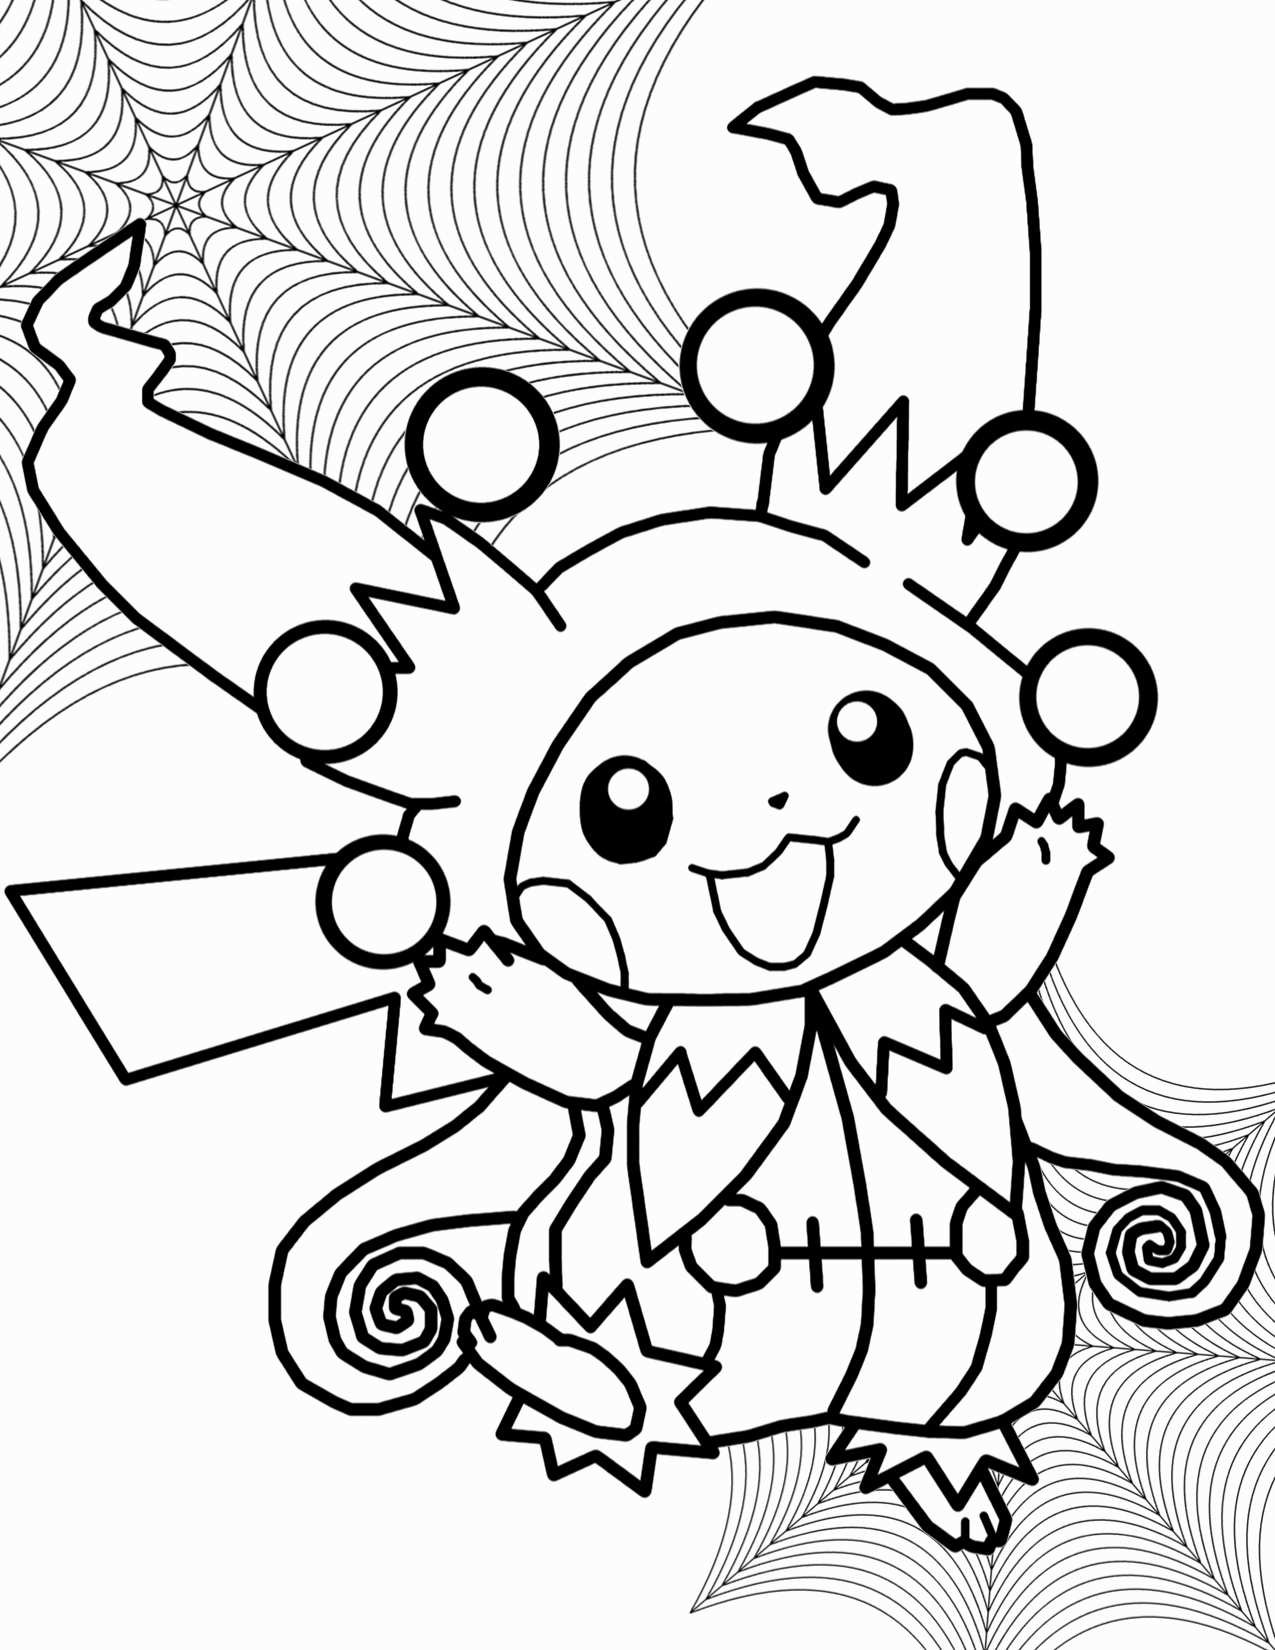 Pokemon Coloring Pages Fresh Here is the Last the Halloween Coloring Pages I Made Have